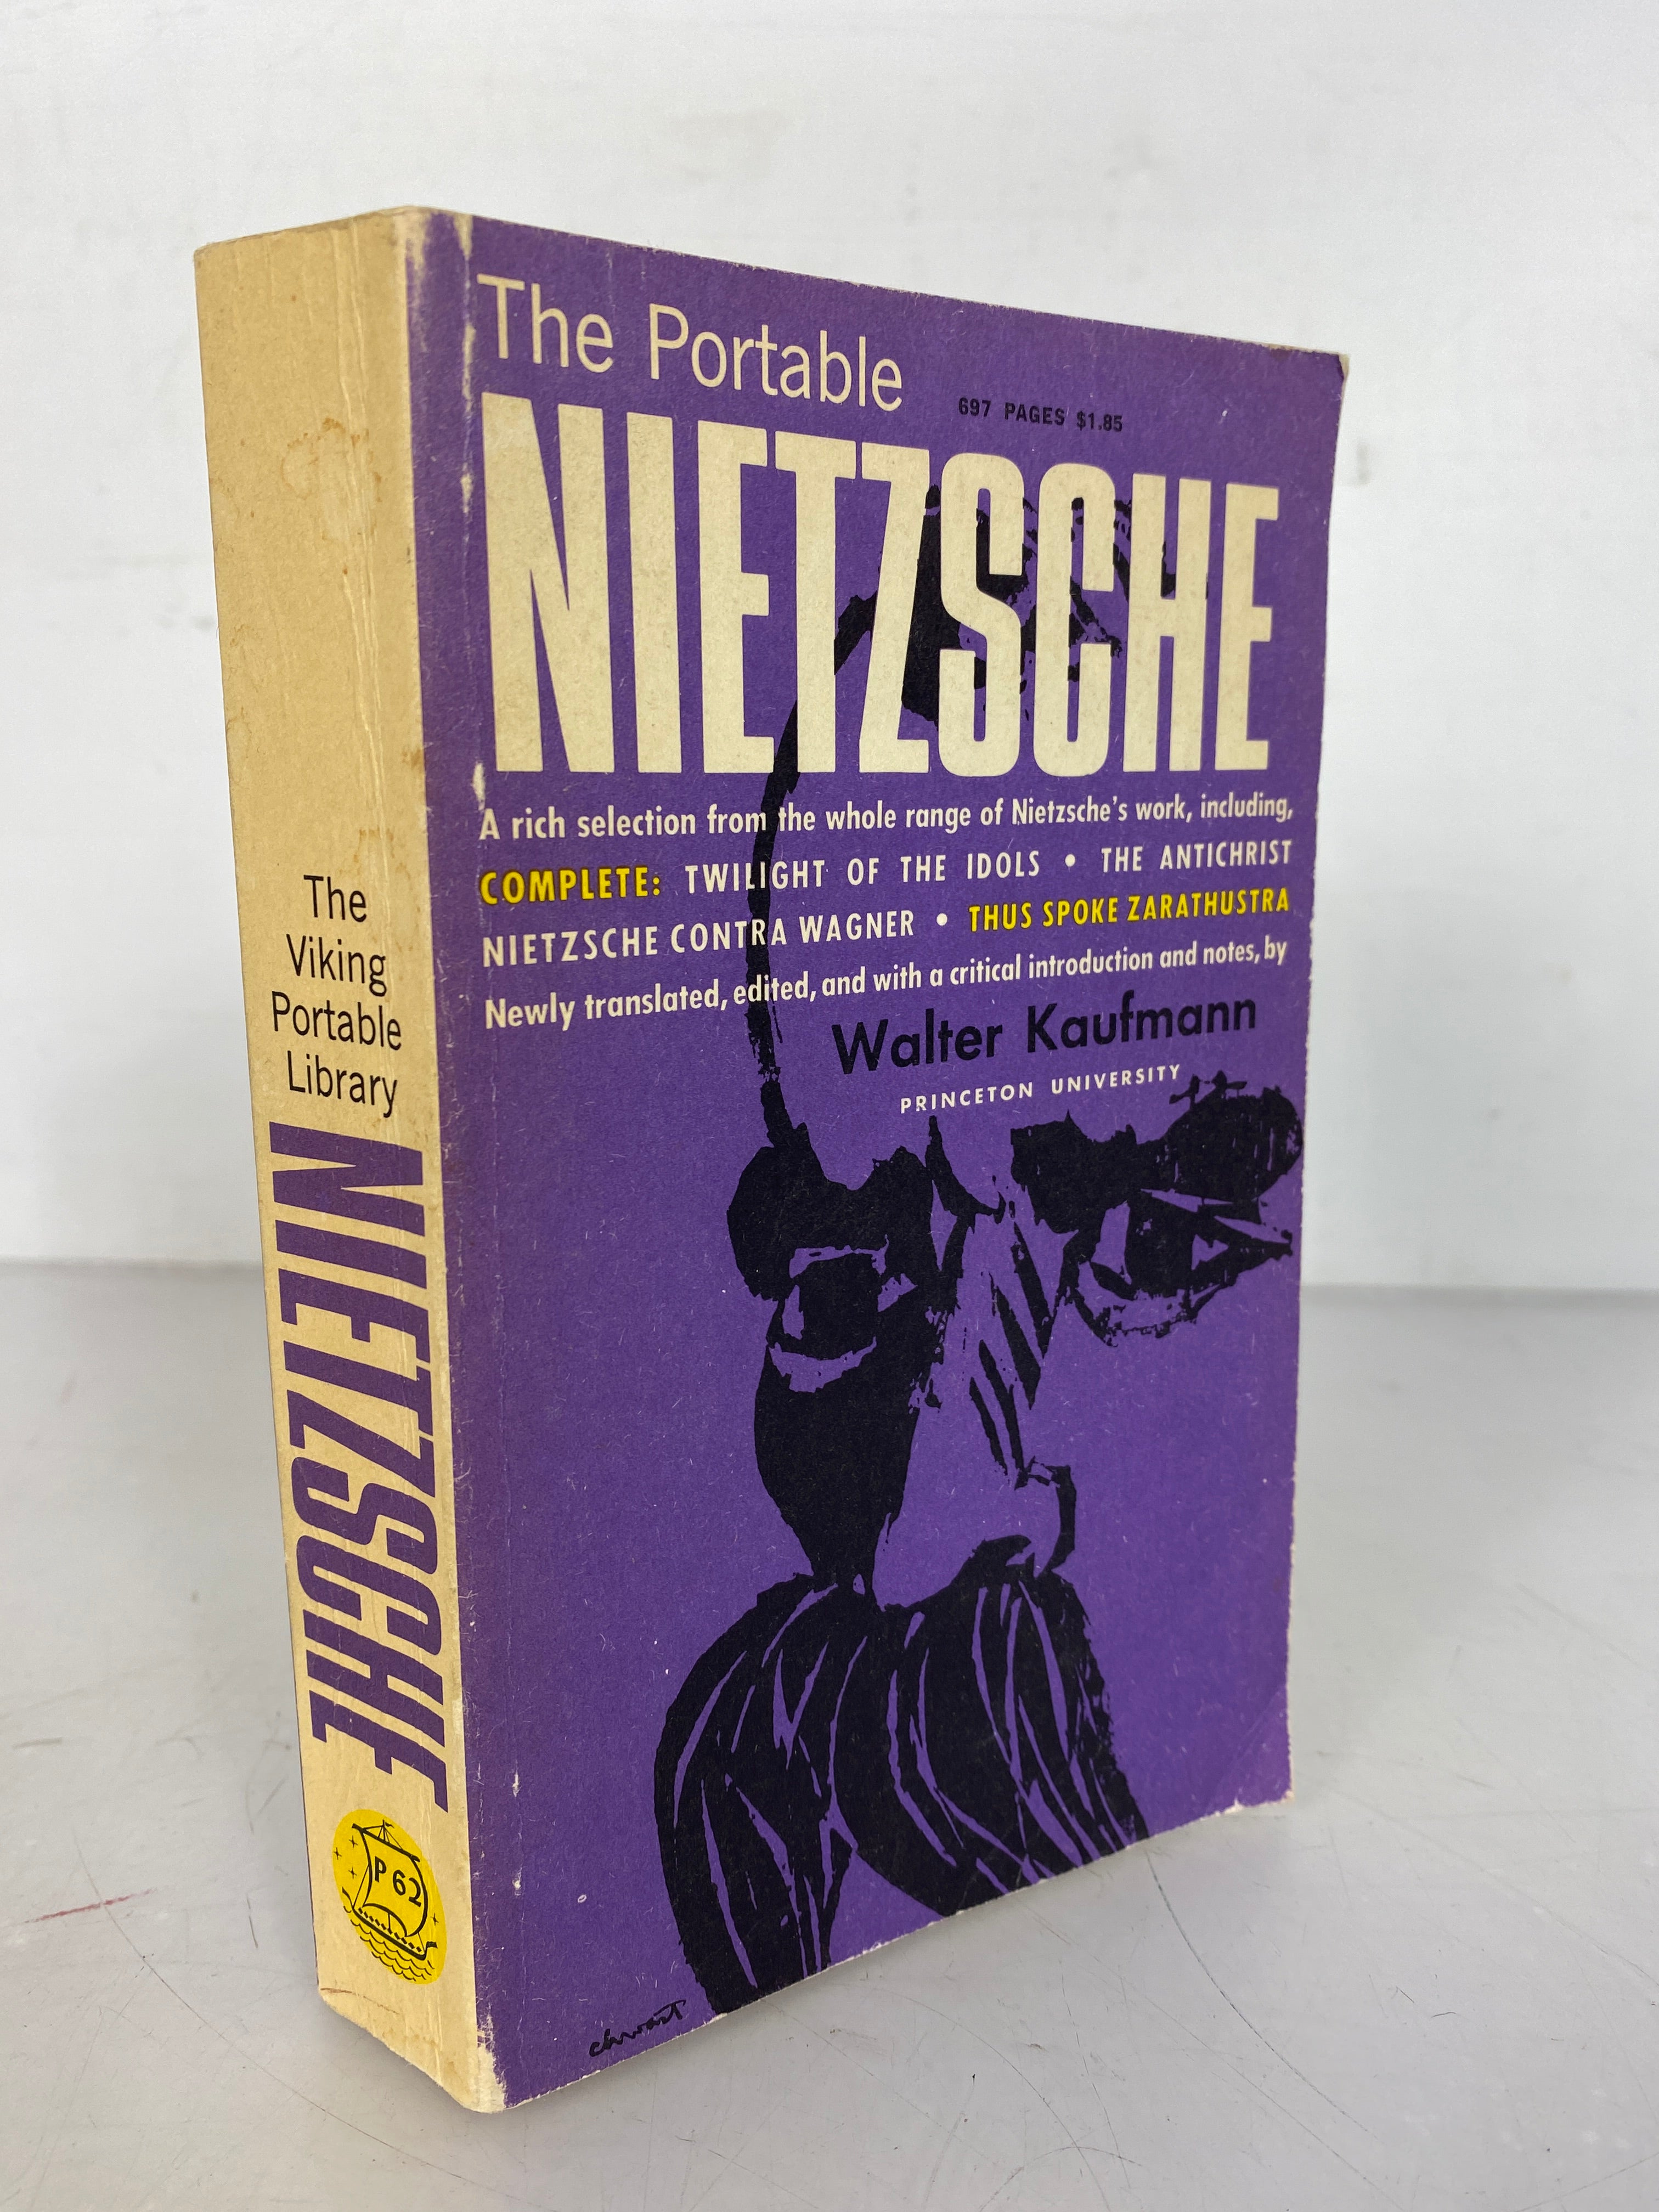 Lot of 2 Philosophy Books The Portable Nietzsche and Philosophical Papers 1966, 1967 SC